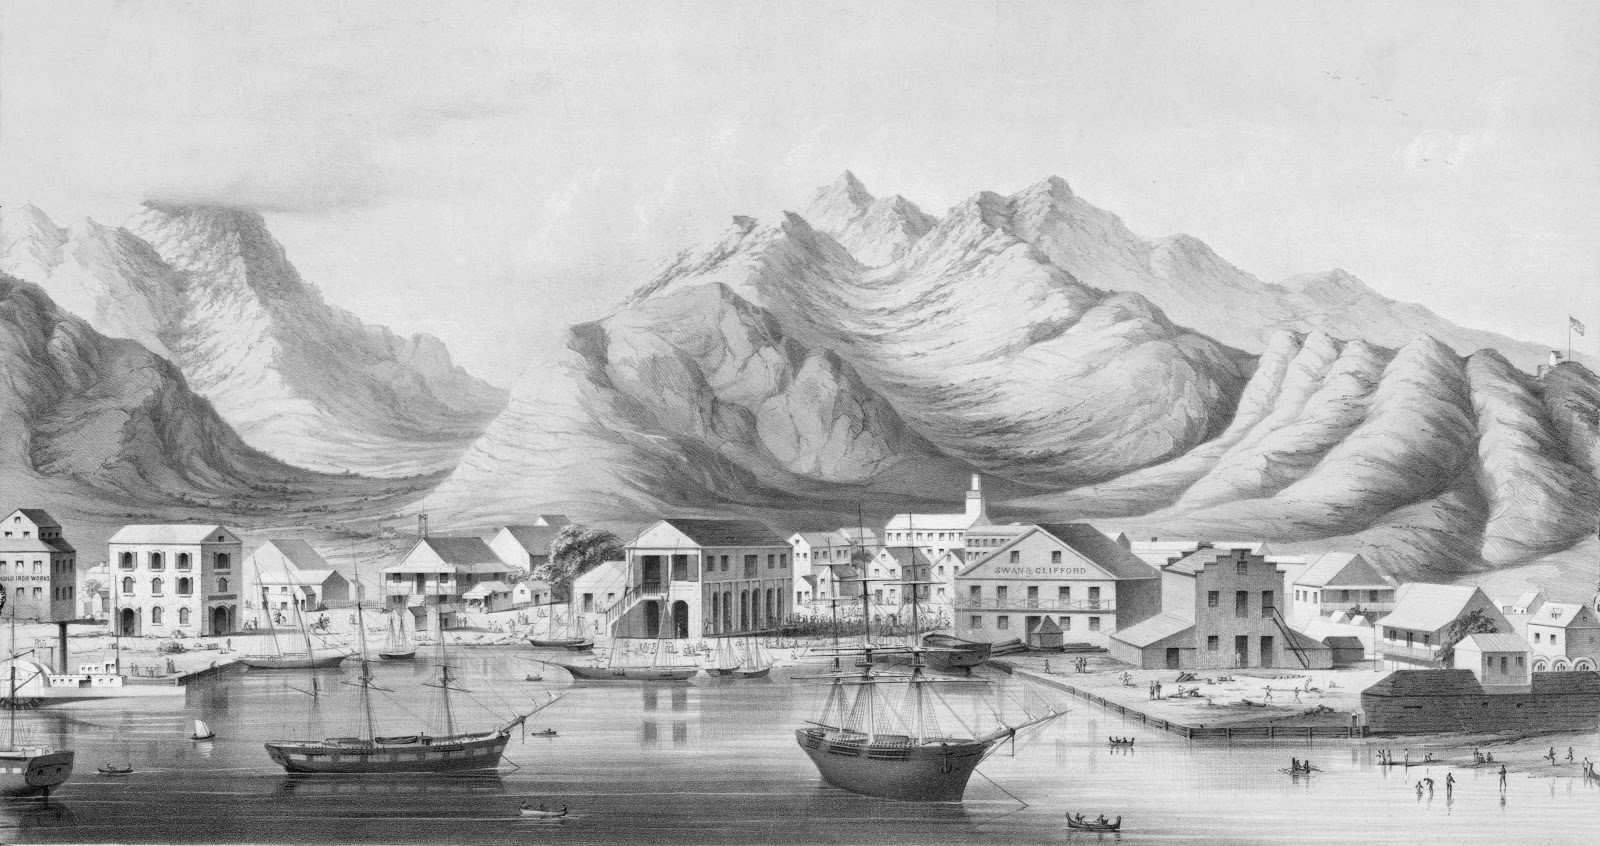 View of Honolulu harbor and Punchbowl Crater circa 1854.